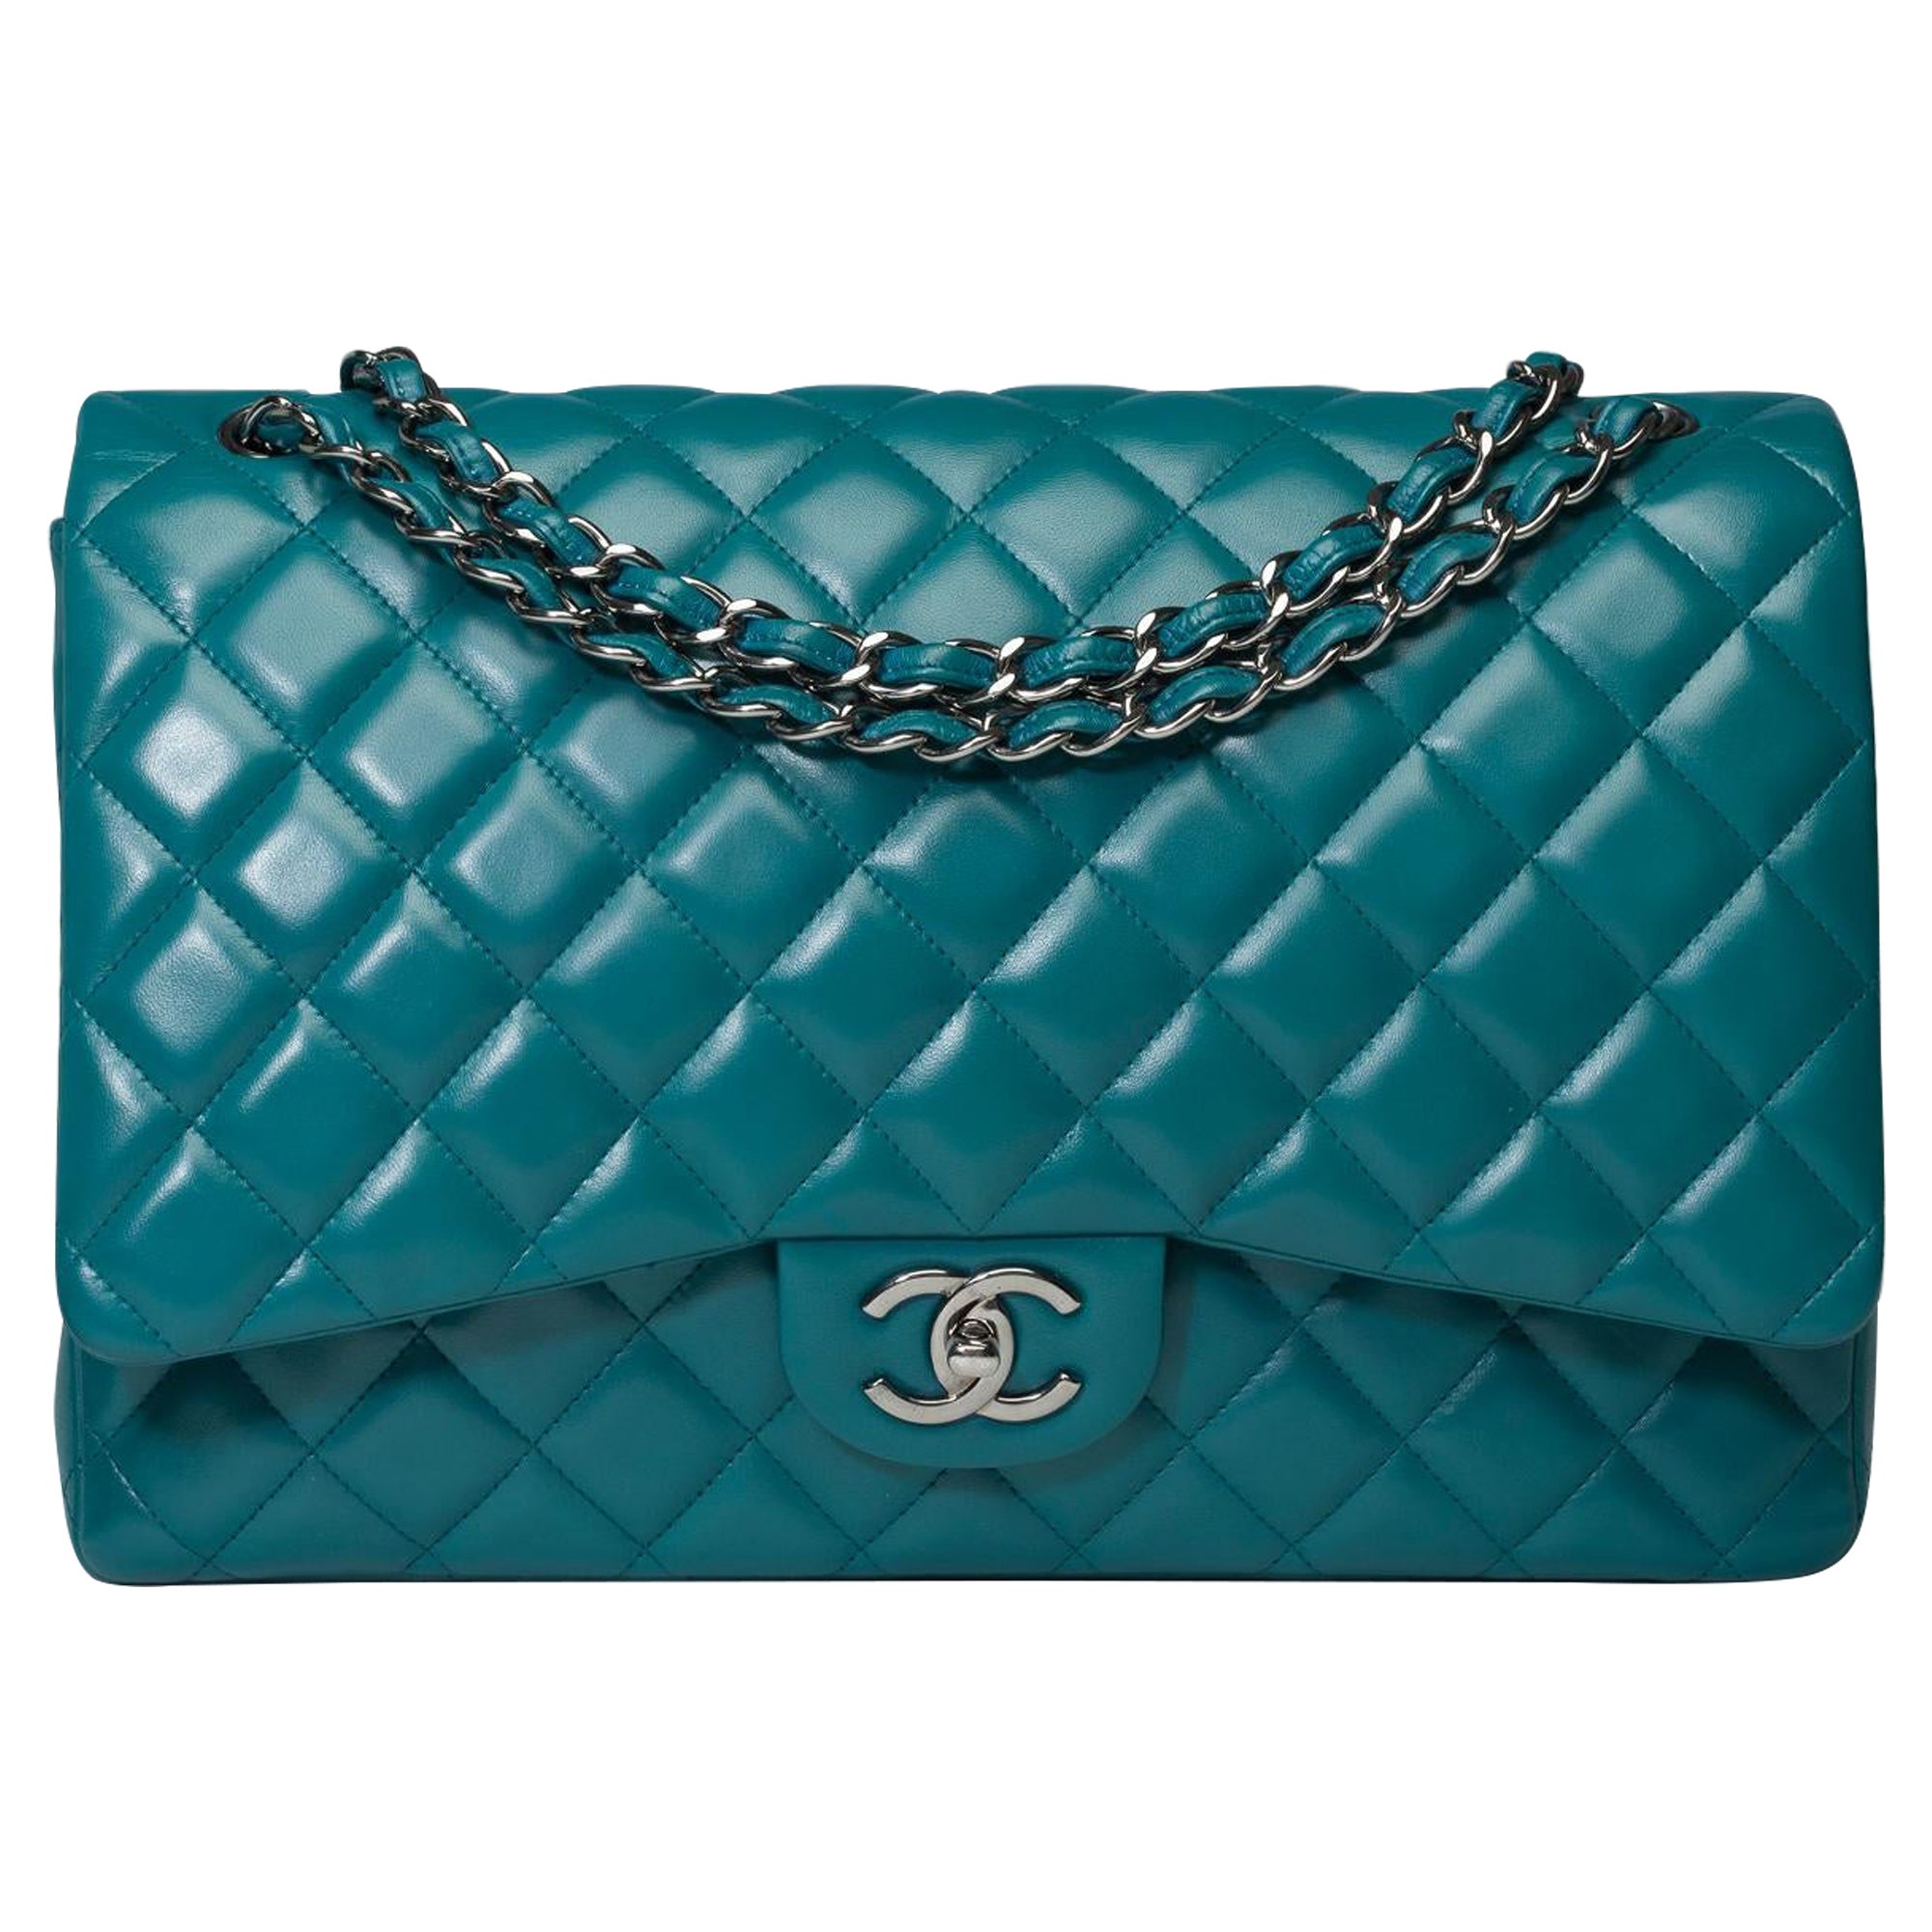 Chanel Timeless Maxi Jumbo shoulder bag in Blue quilted lambskin leather, SHW For Sale